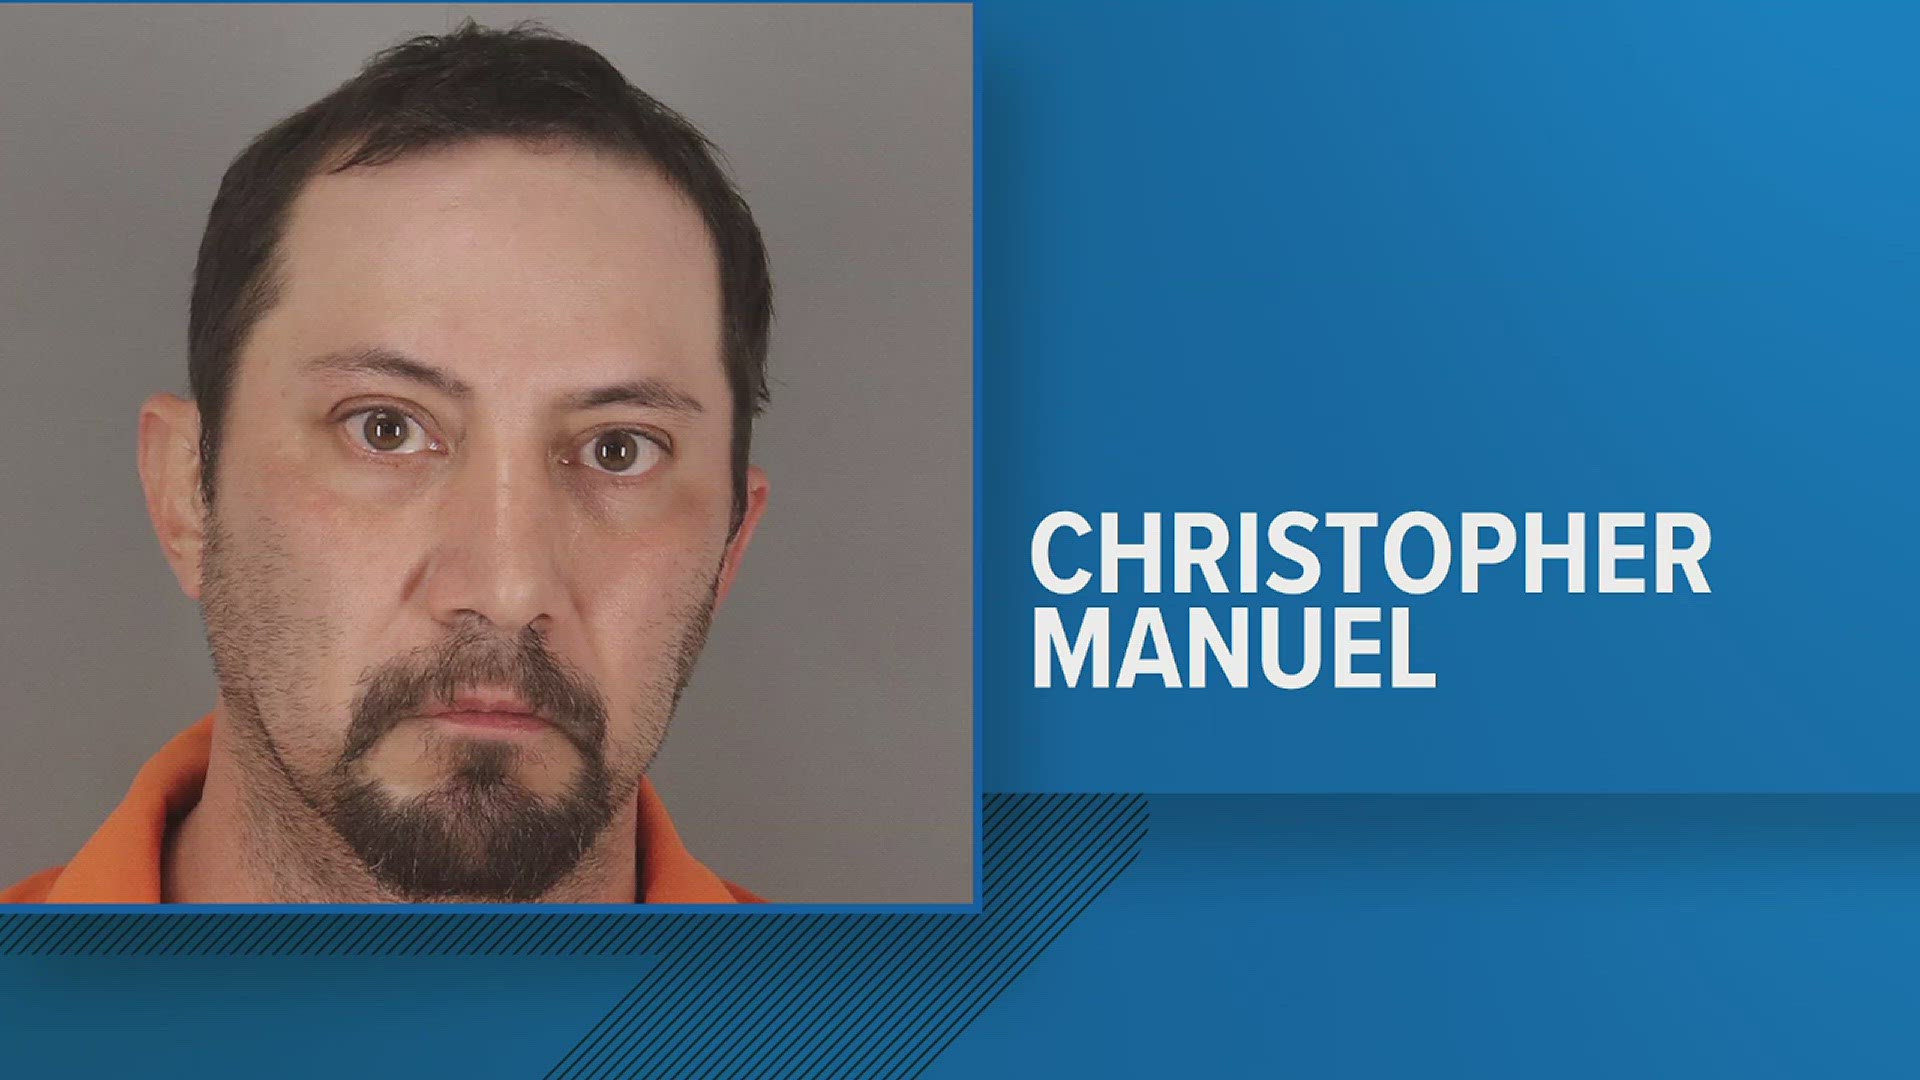 Christopher Manuel, 42, used a Google account in 2022 to download over 500 video files of the pornography, according to a probable cause affidavit.